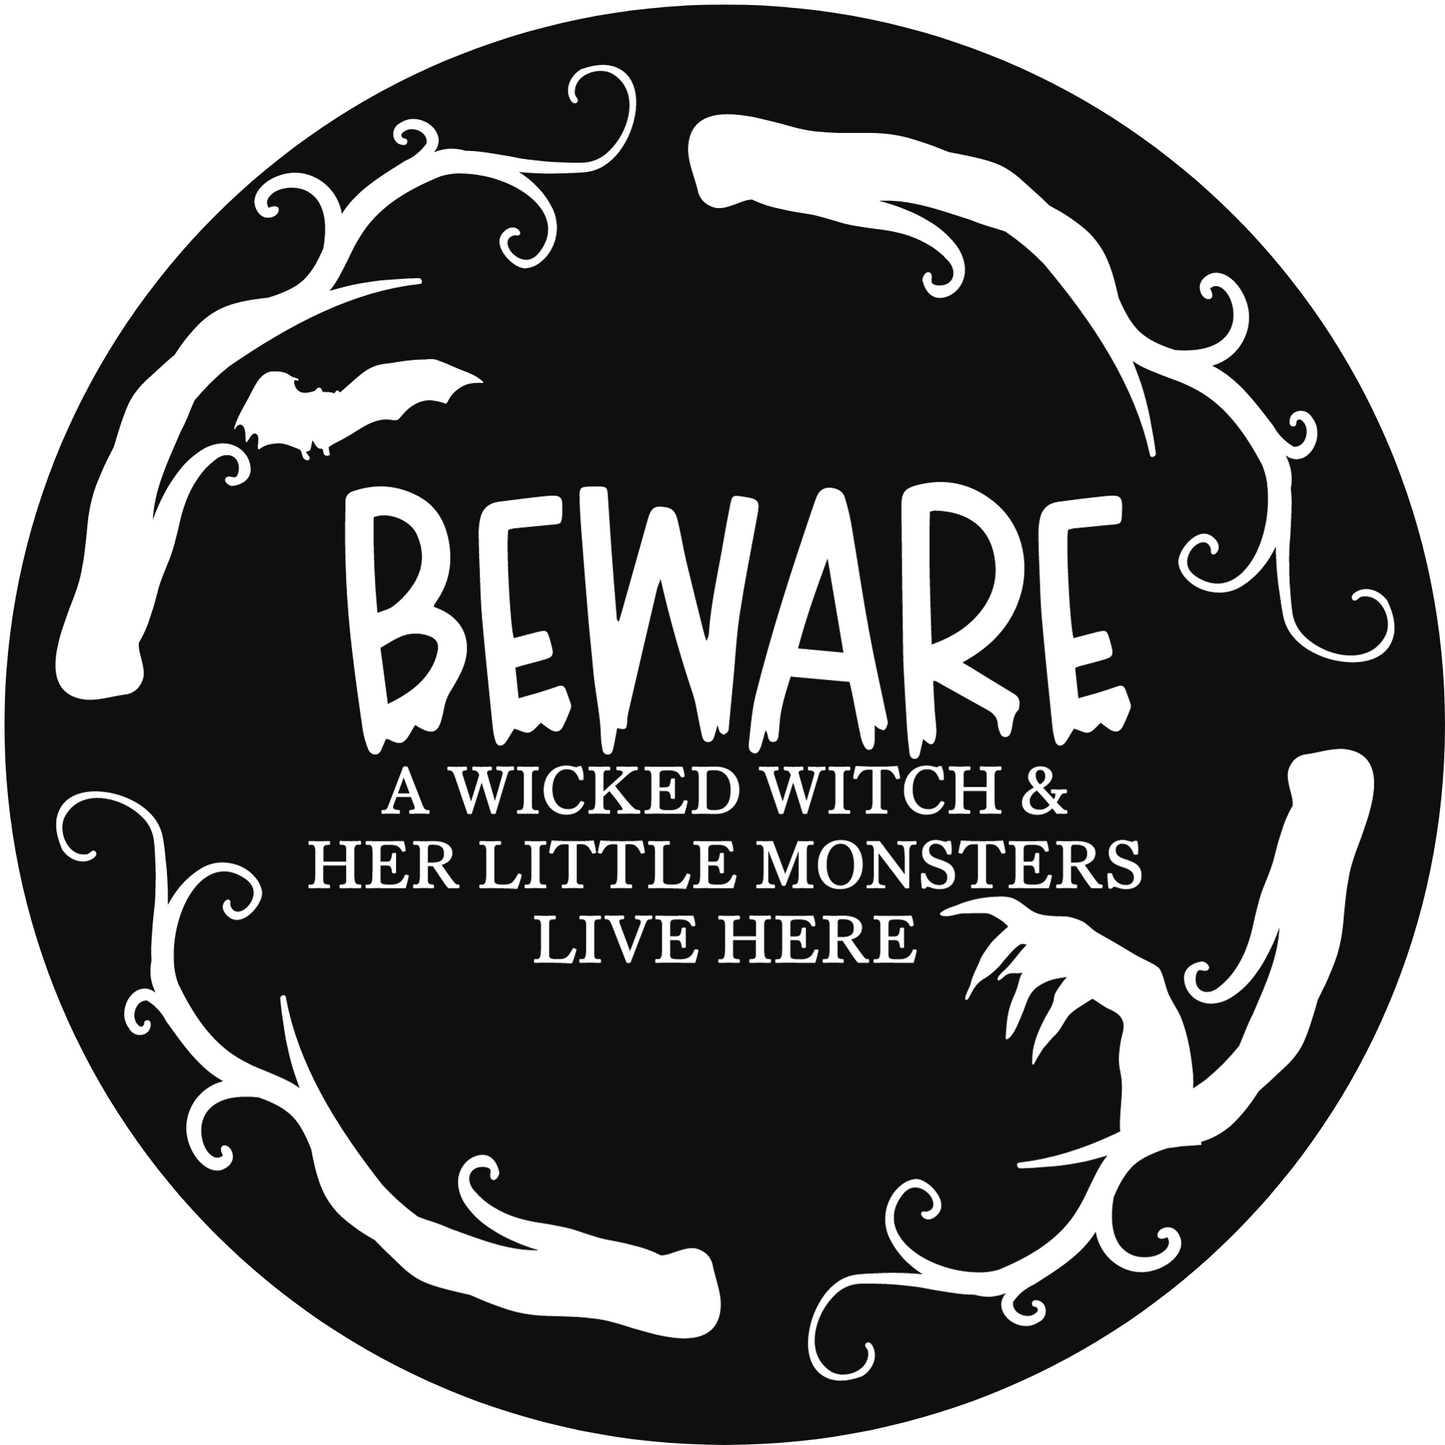 Beware a wicked witch lives here round sign